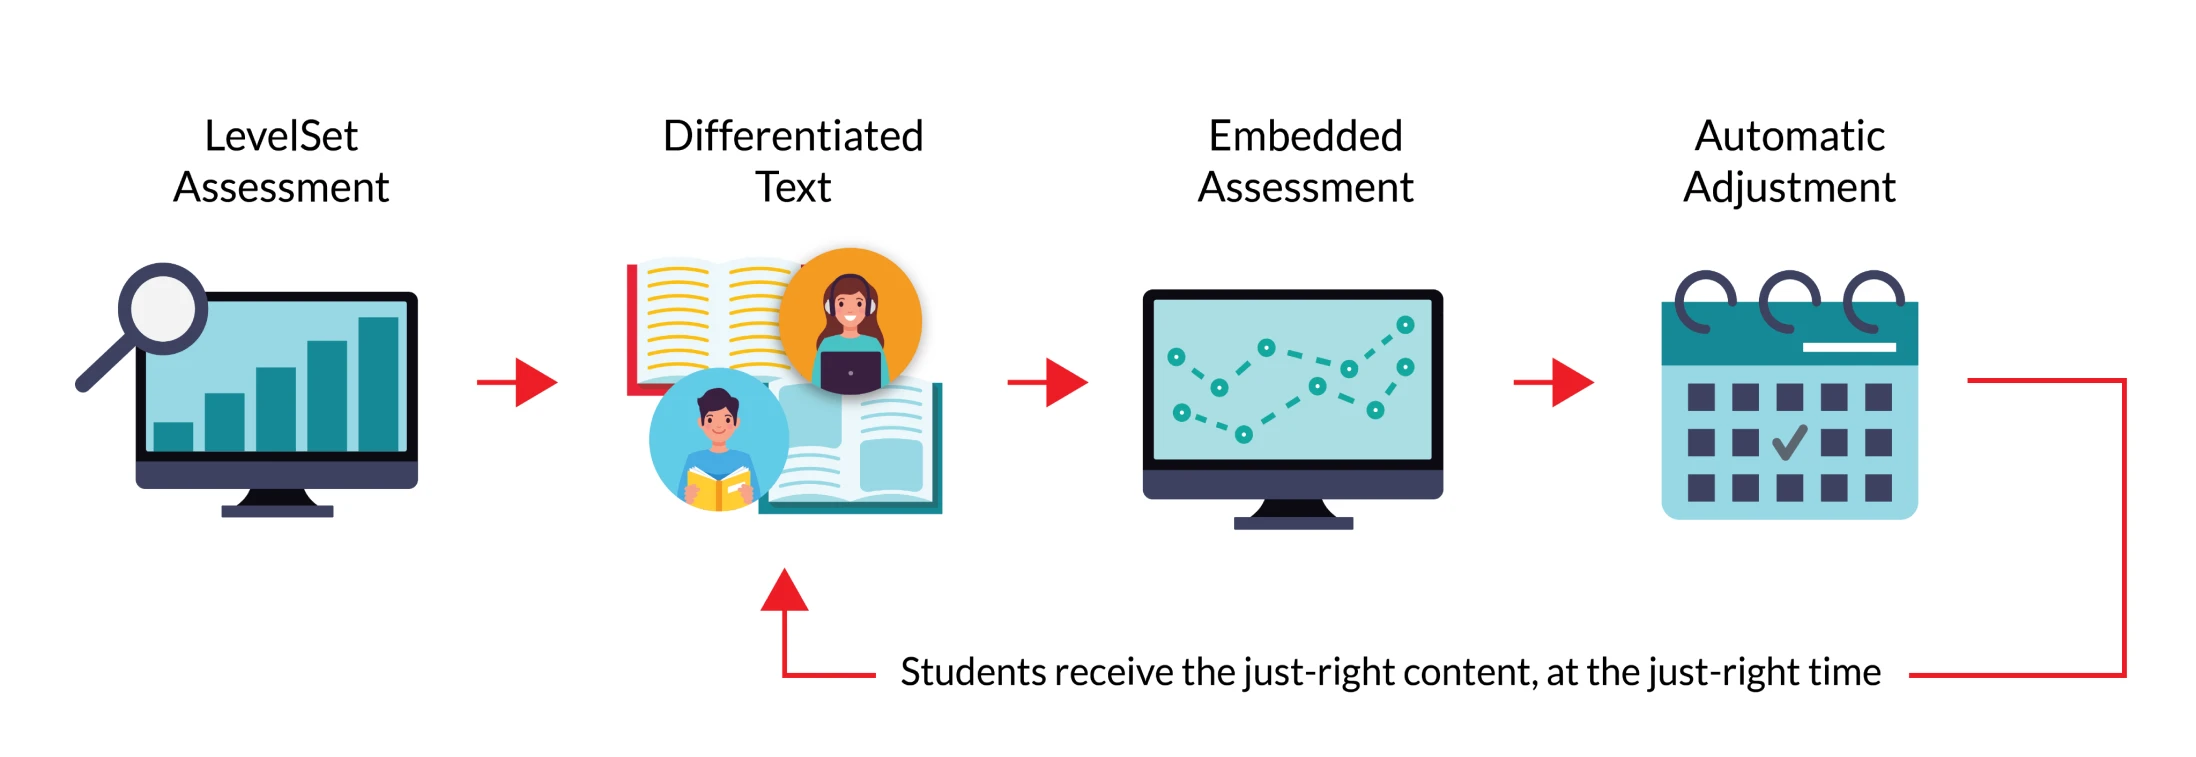 A visual flow chart showing the following steps: 1) LevelSet Assessment, 2) Differentiated Text, 3) Embedded Assessment, 4) Automatic Adjustment, resulting with students receiving the just-right content at the just-right time, circling back to step 2 to suggest the cycle of this workflow.